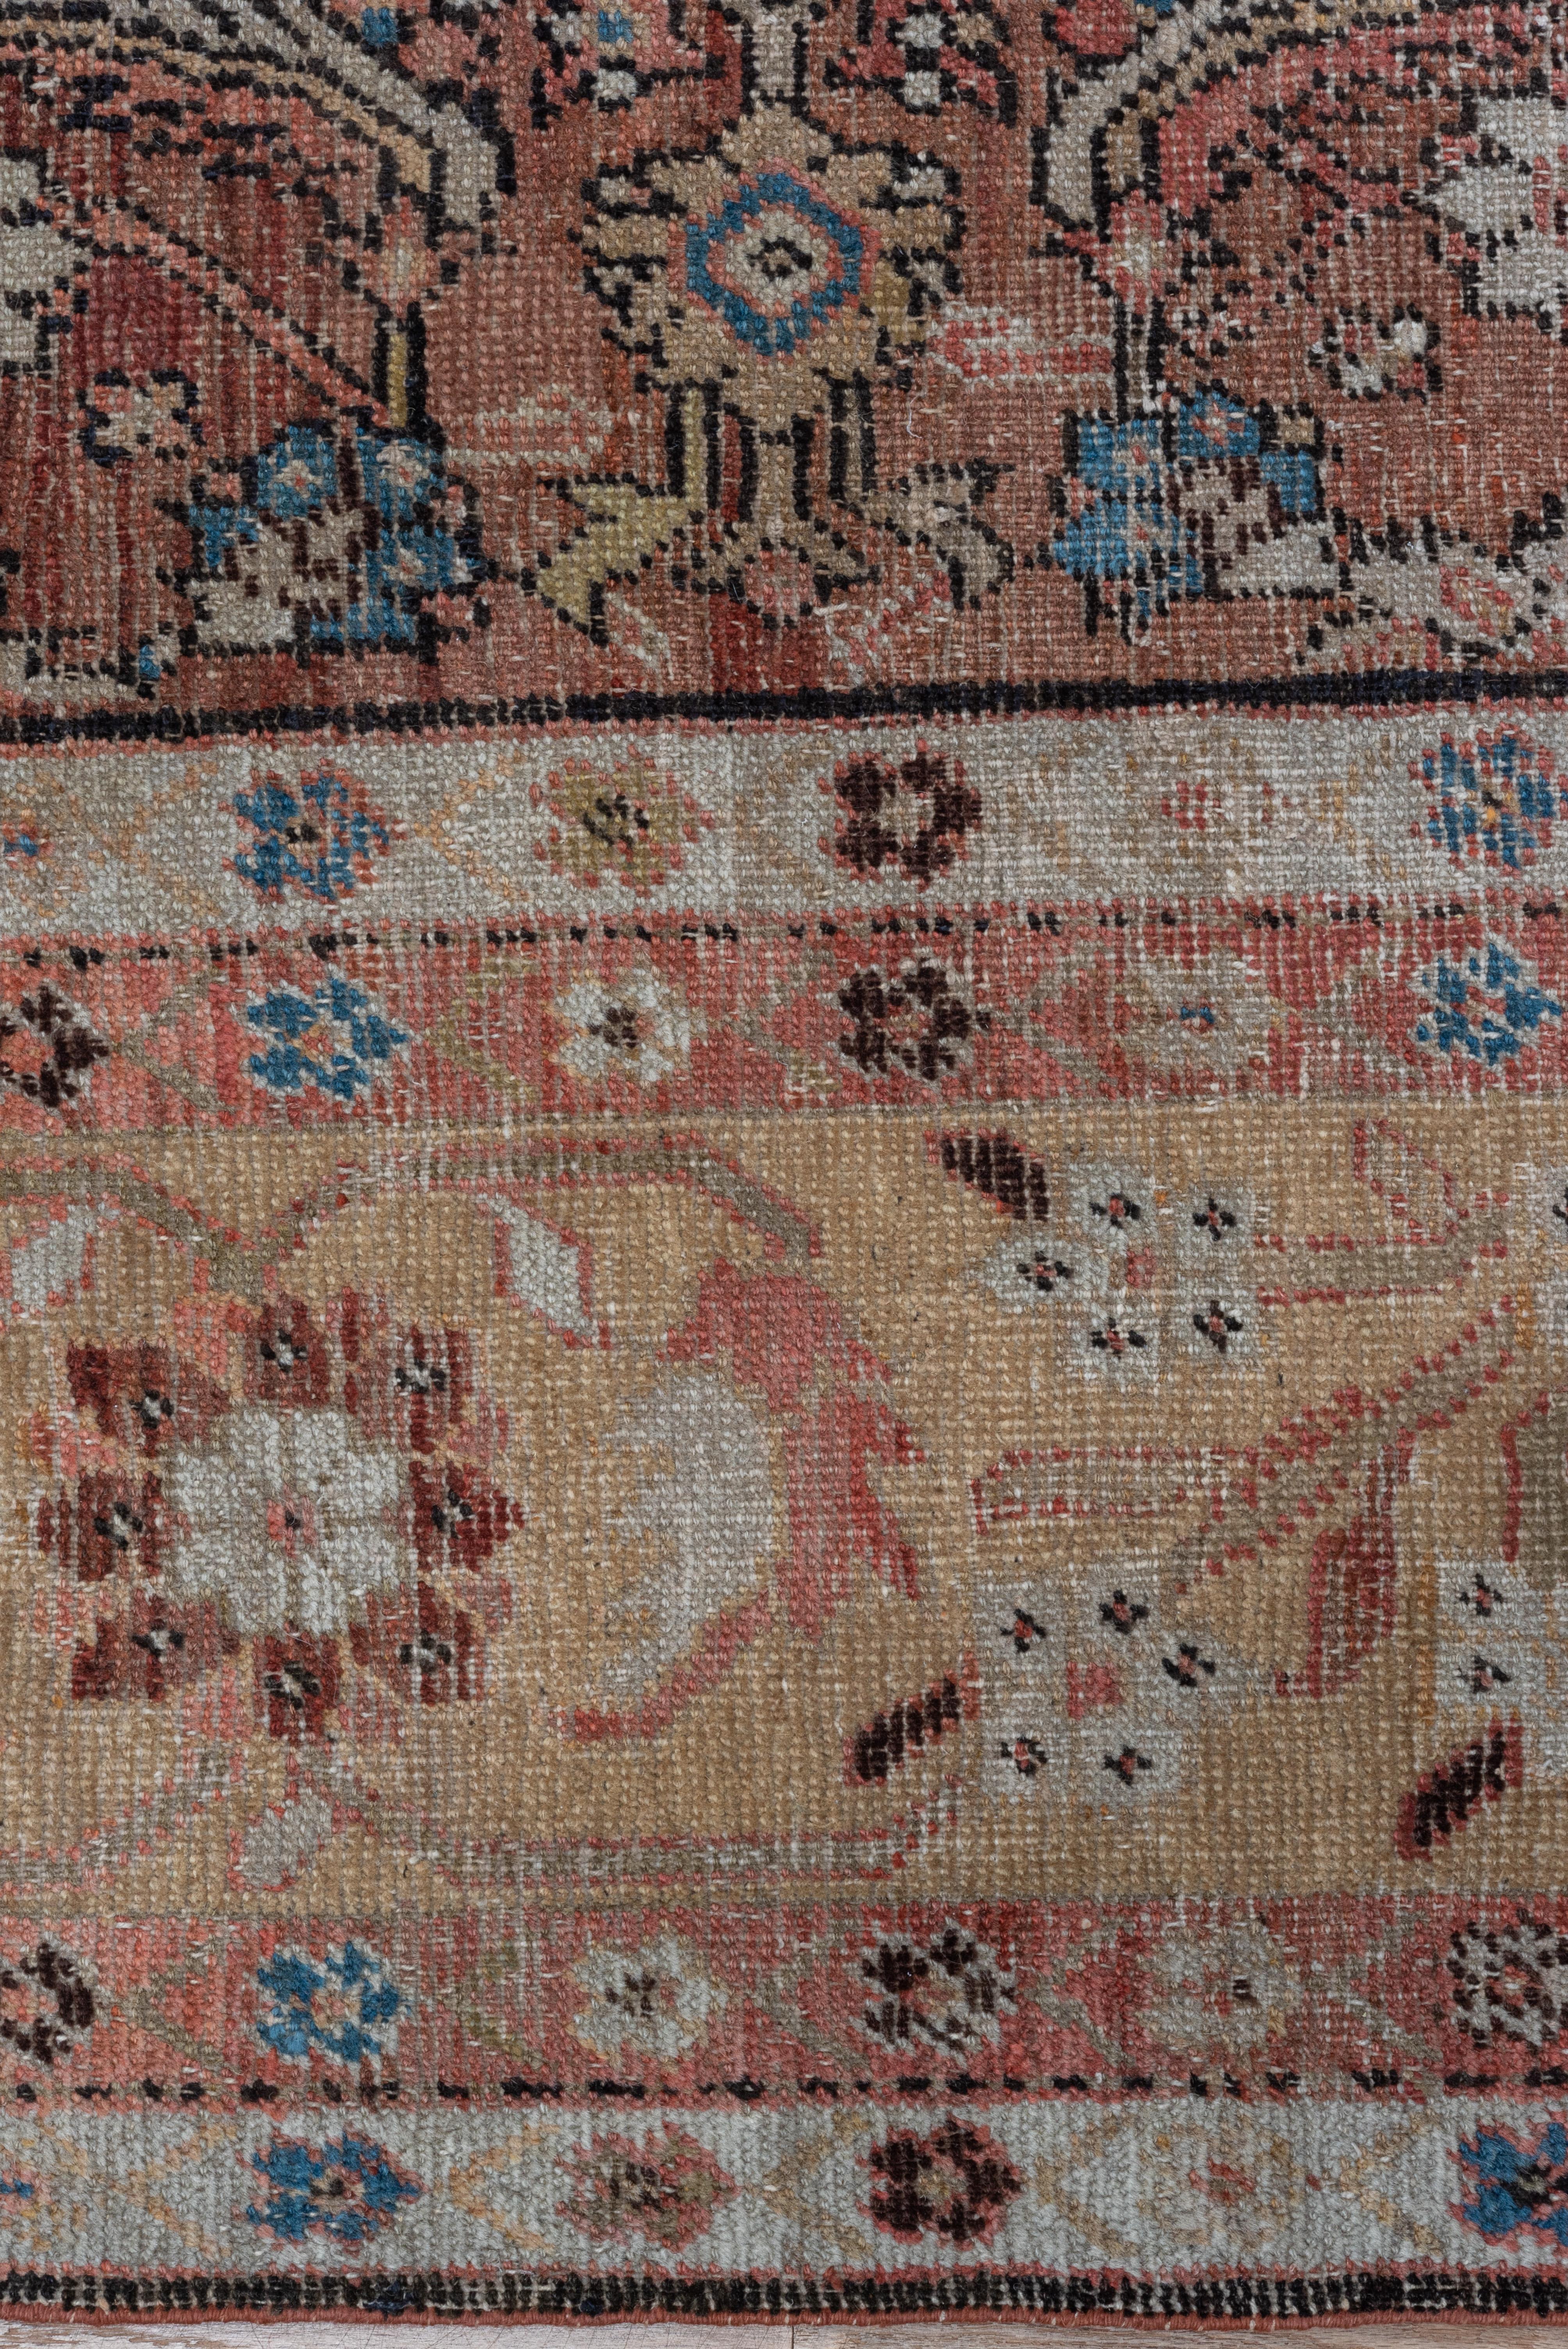 The relatively small abrashed madder red field shows a Classic Herati all-over pattern of rosettes, open lozenges and lancet leaves accented in cream, green and lighter blue. This west Persian rustic room size carpet has a particularly wide straw